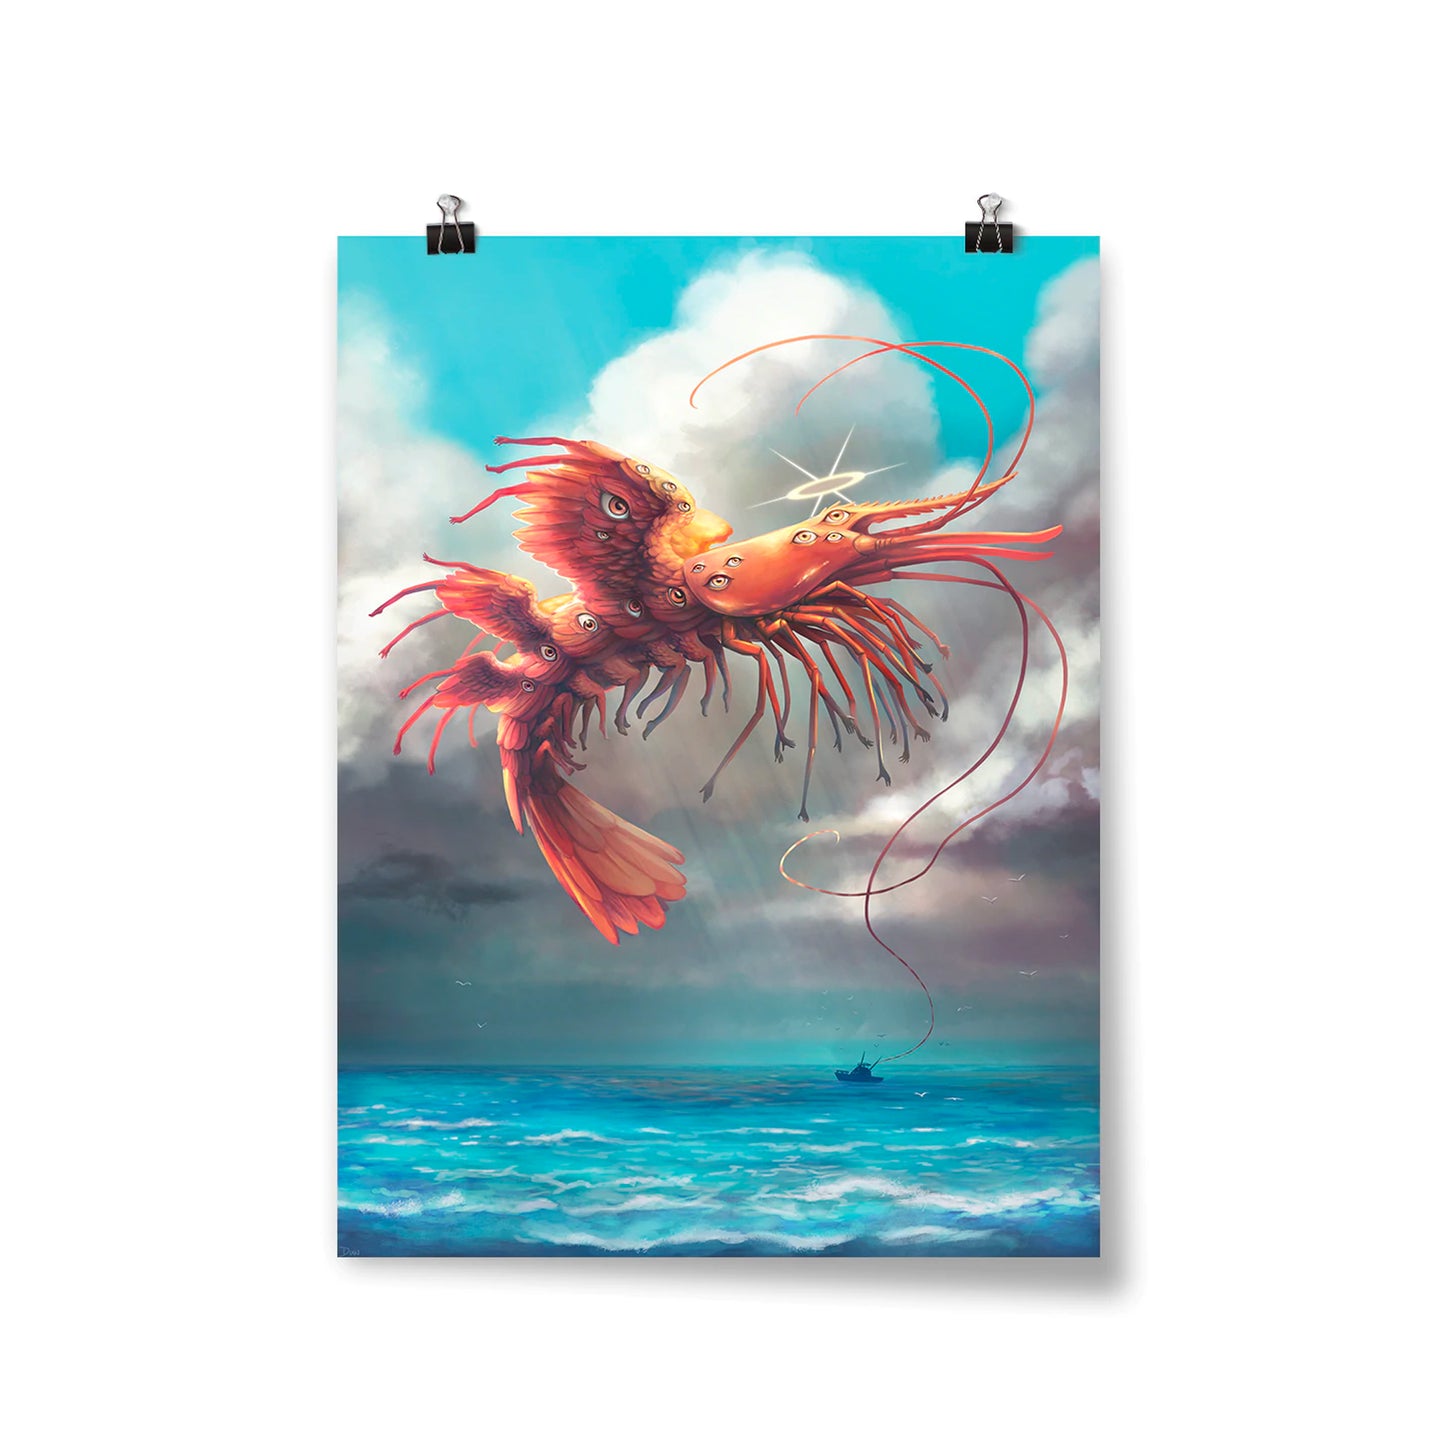 Poster of an enormous shrimp hovering in the sky over a boat. The shrimp has wings, a halo, and sixteen eyes along its body. The background is a sky full of stormy clouds and a rough ocean.